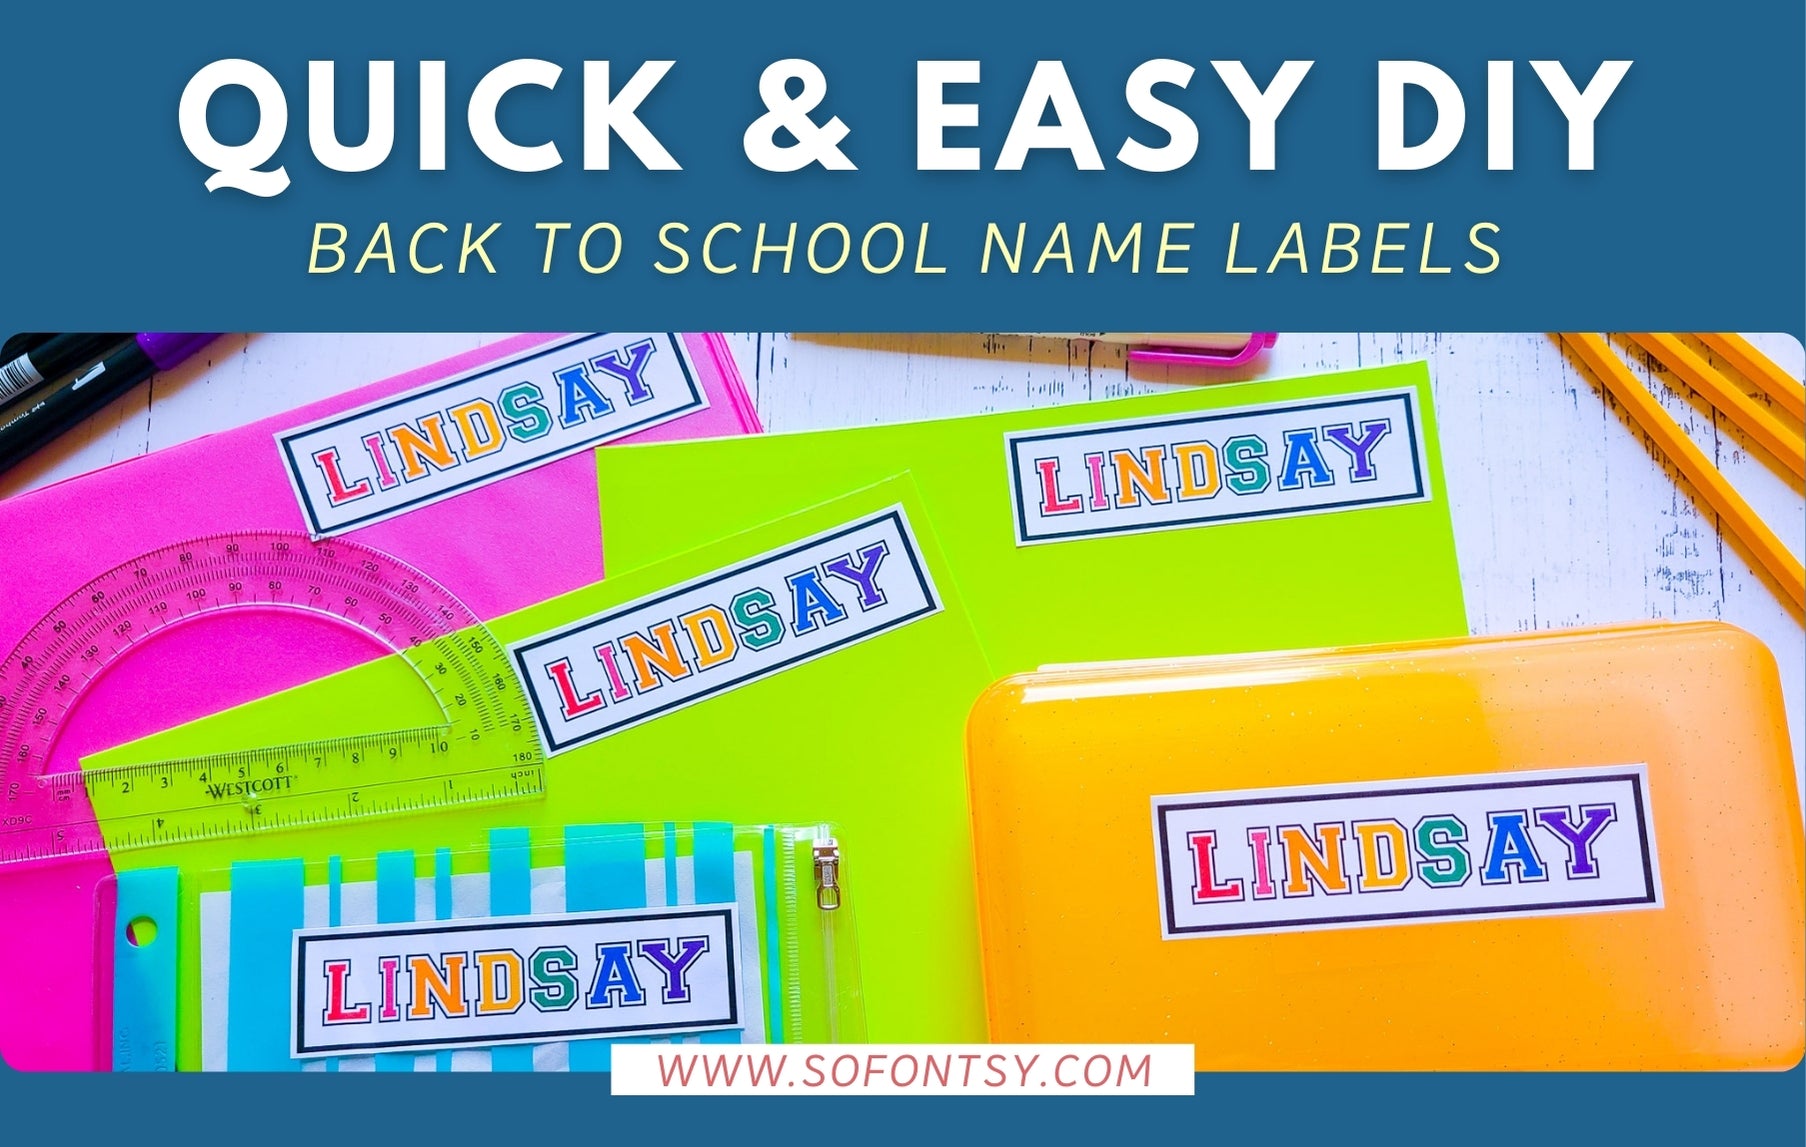 Quick fixes: How to add school name labels 